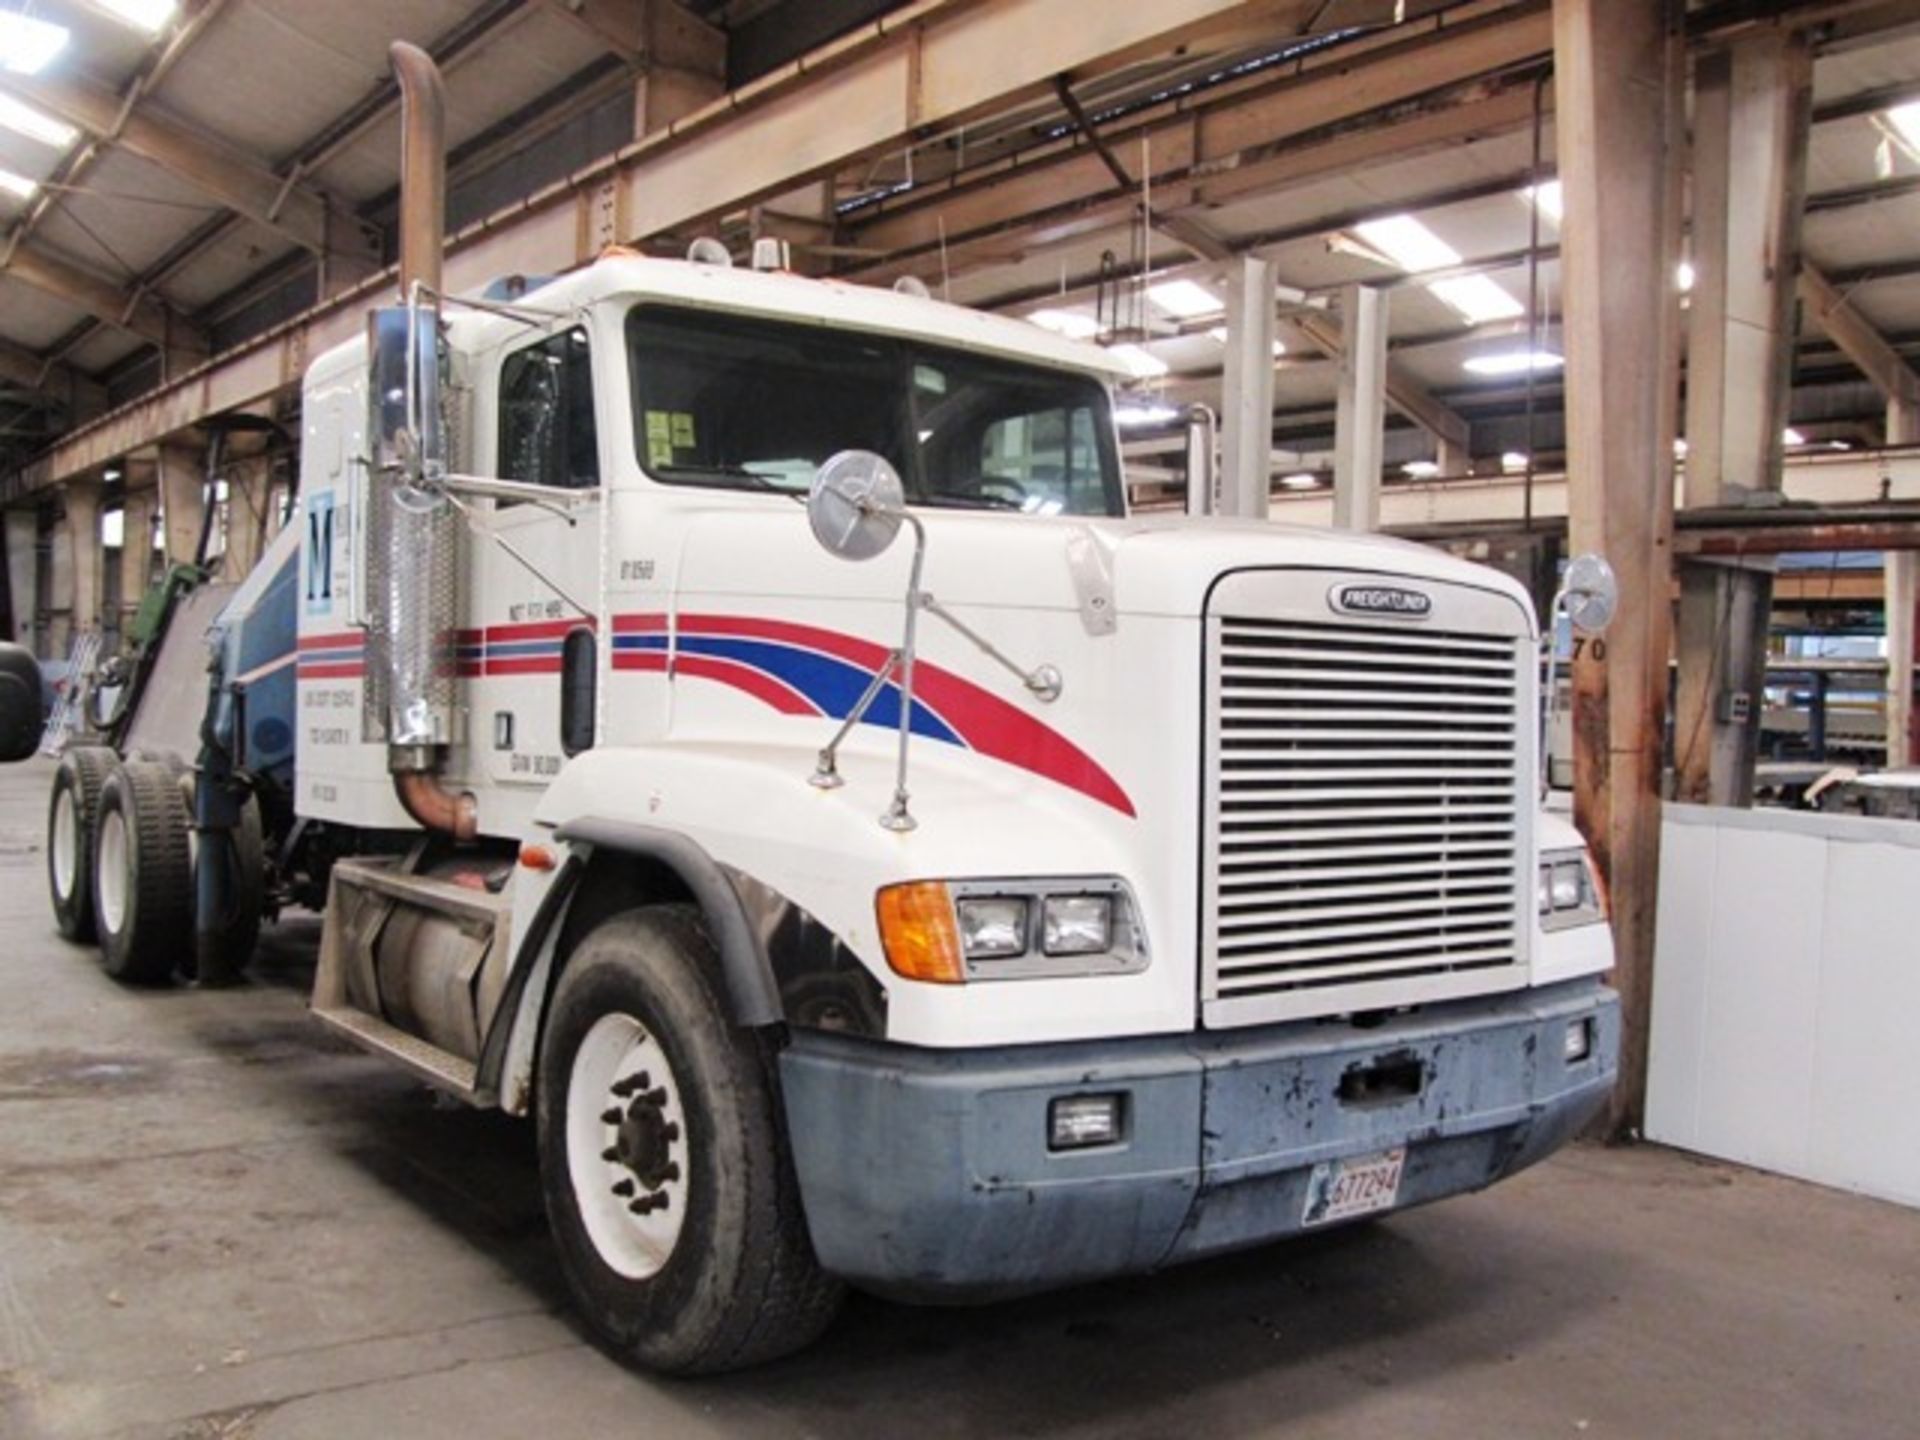 Freightliner Diesel Tractor Truck with 5th Wheel, HIRB Hydraulic Extendable Crane & Boom, Out